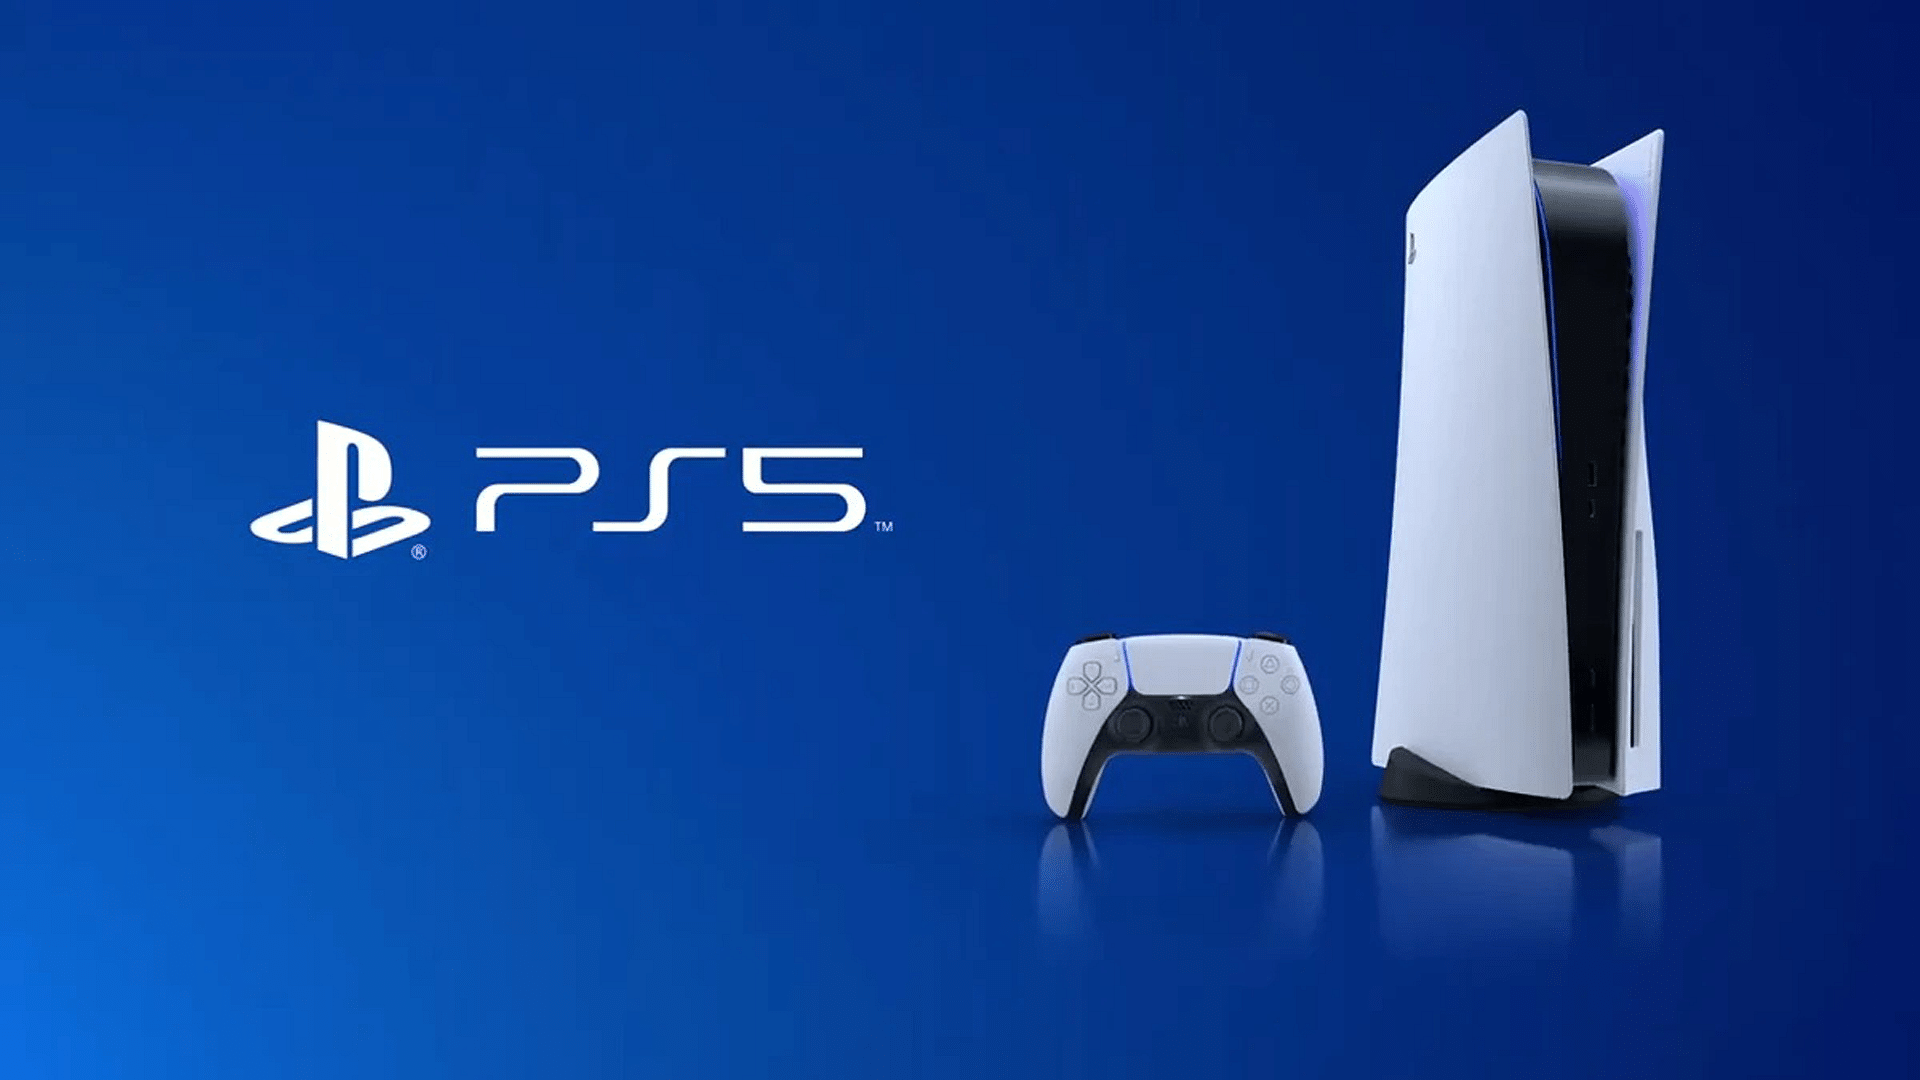 Insider information claims PS5 Pro will be announced before GTA 6's  release, fans apprehensive of leaked spec sheet - The SportsRush